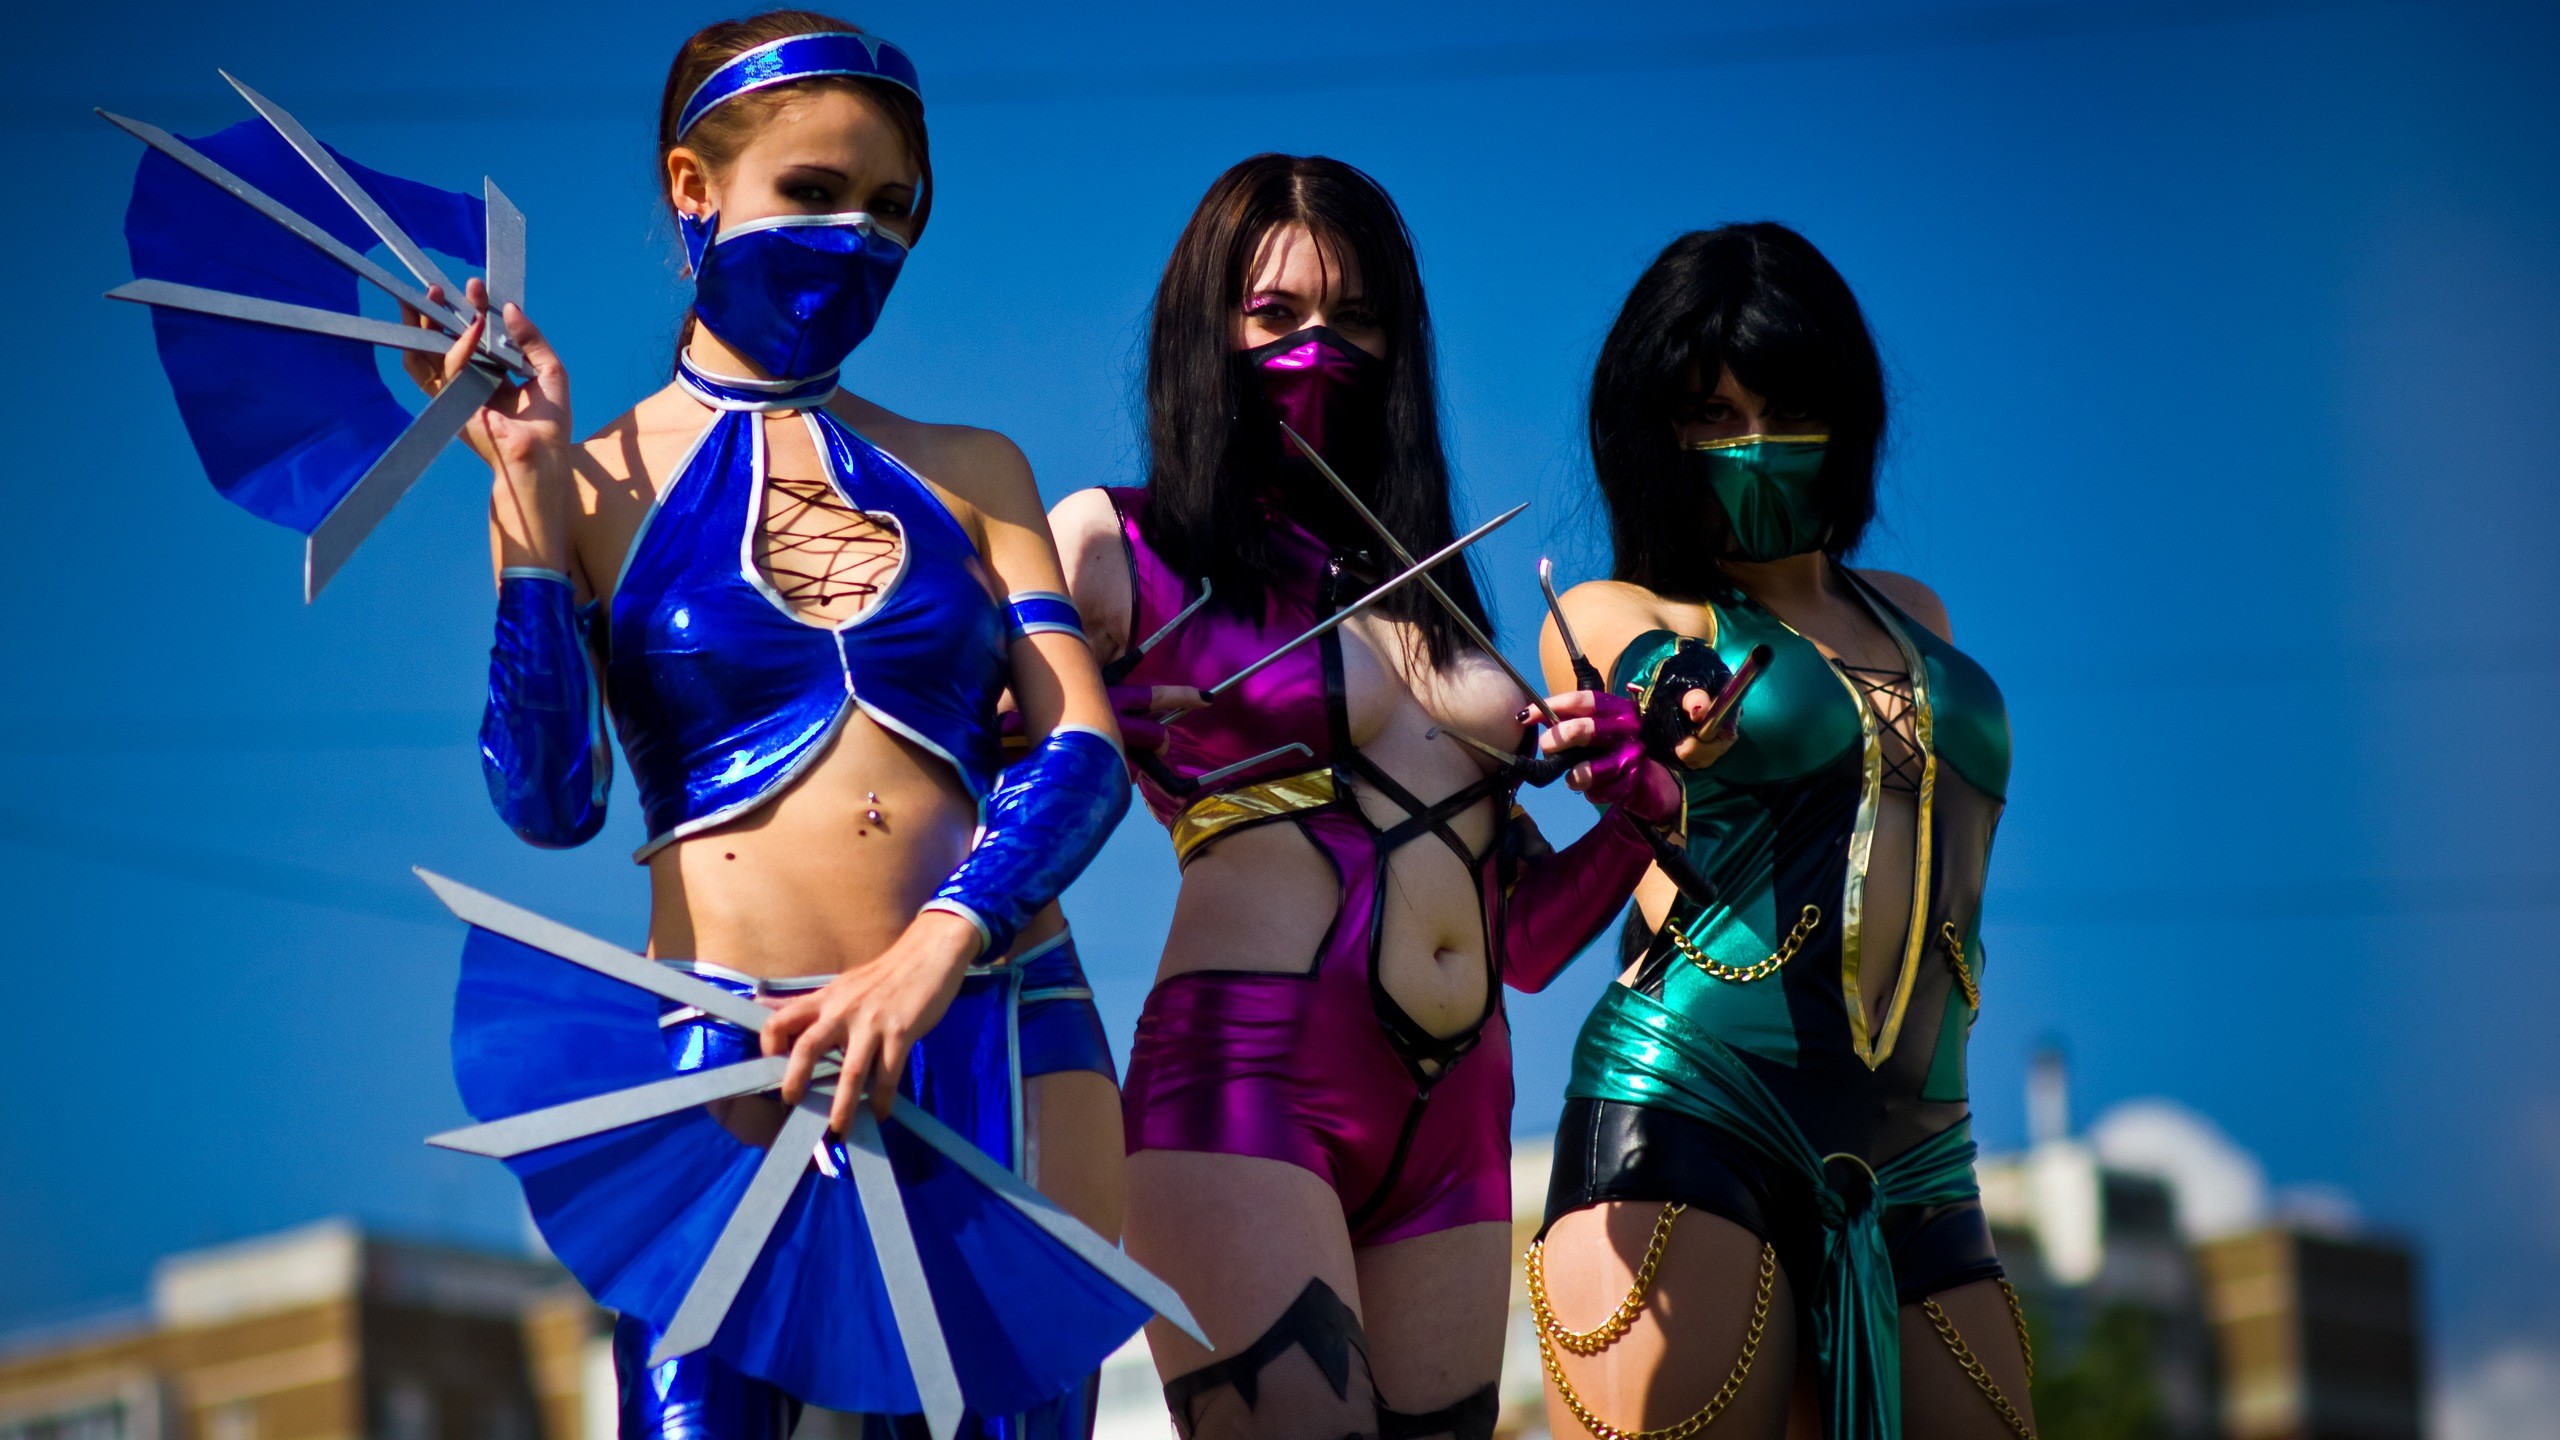 HD wallpaper of a Kitana, Mileena and Jade cosplay from the Mortal  Kombat video game series. The widescreen version (2240×1400) of the  wallpaper …